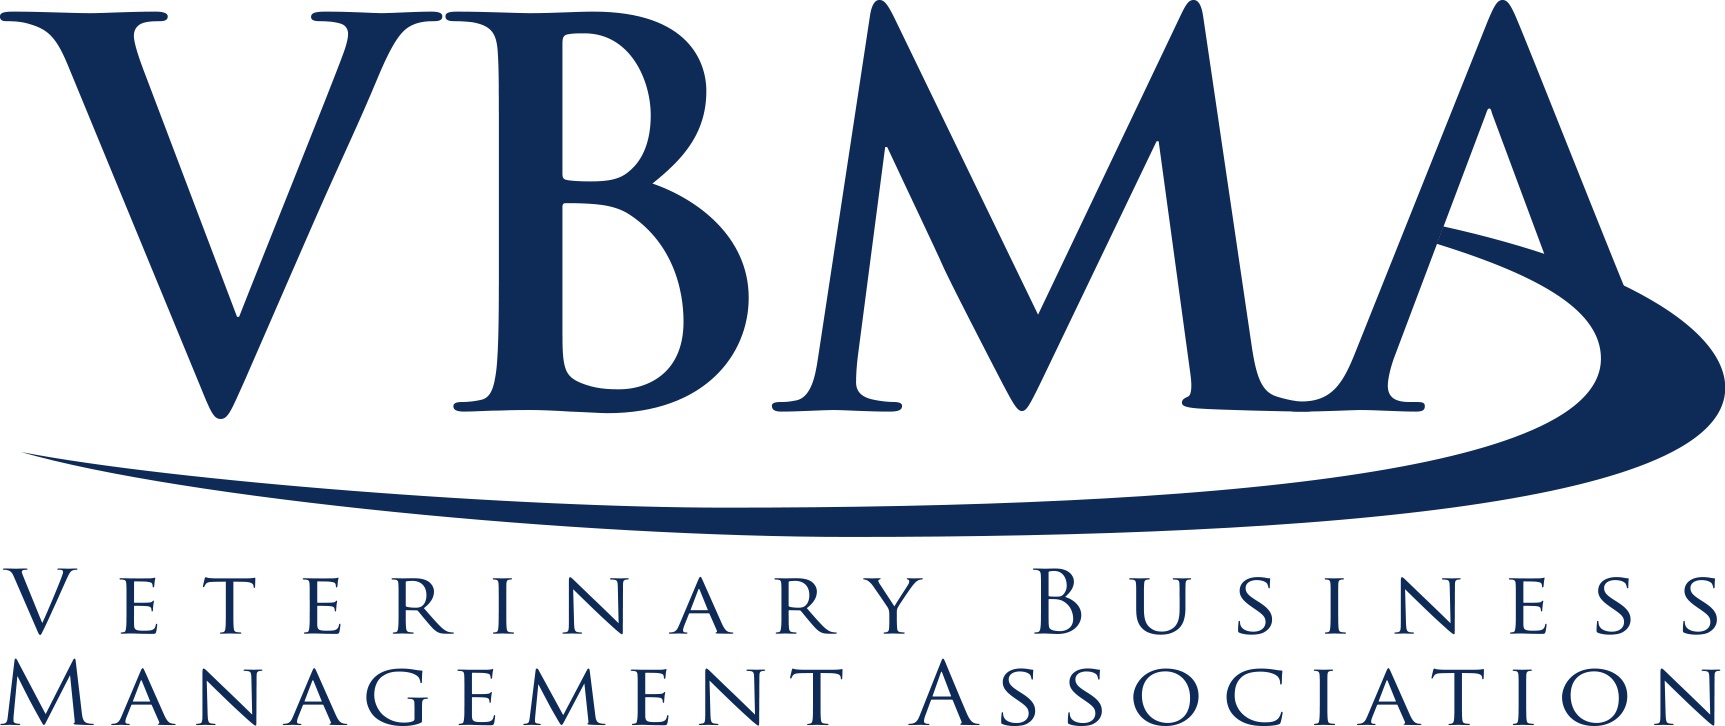 VBMA Dues - 1 Year